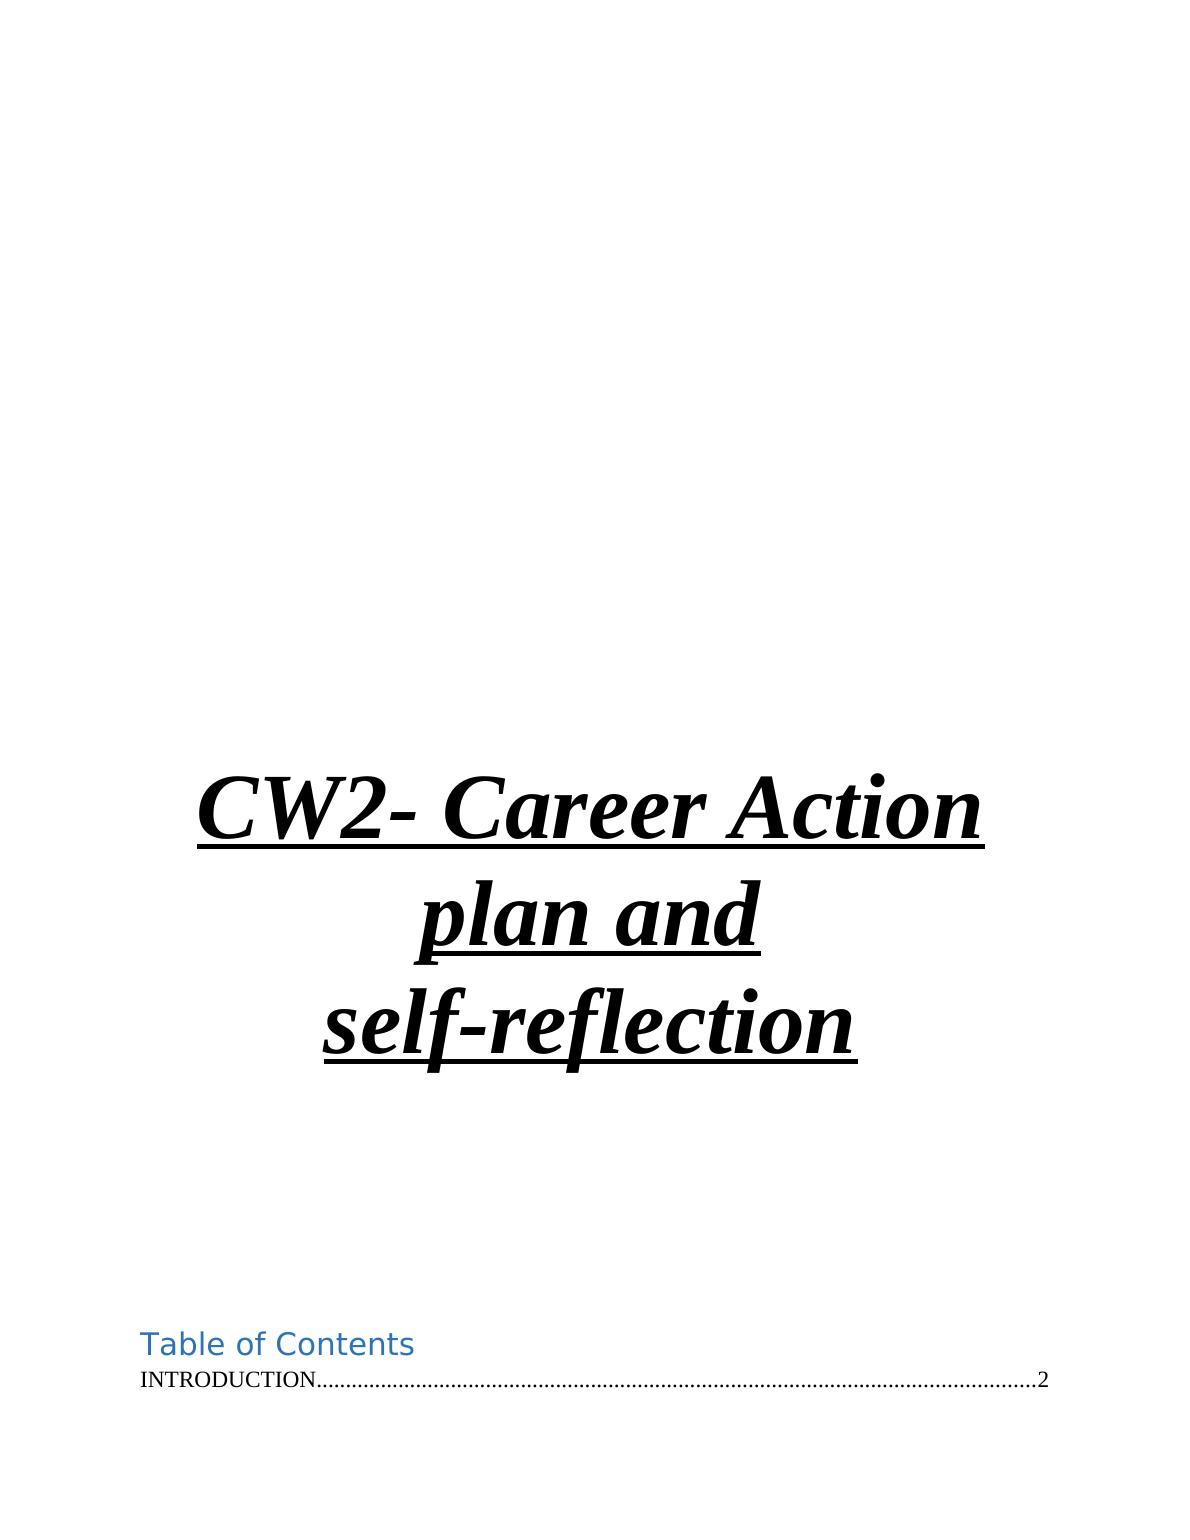 Career Action Plan and Self-Reflection_1